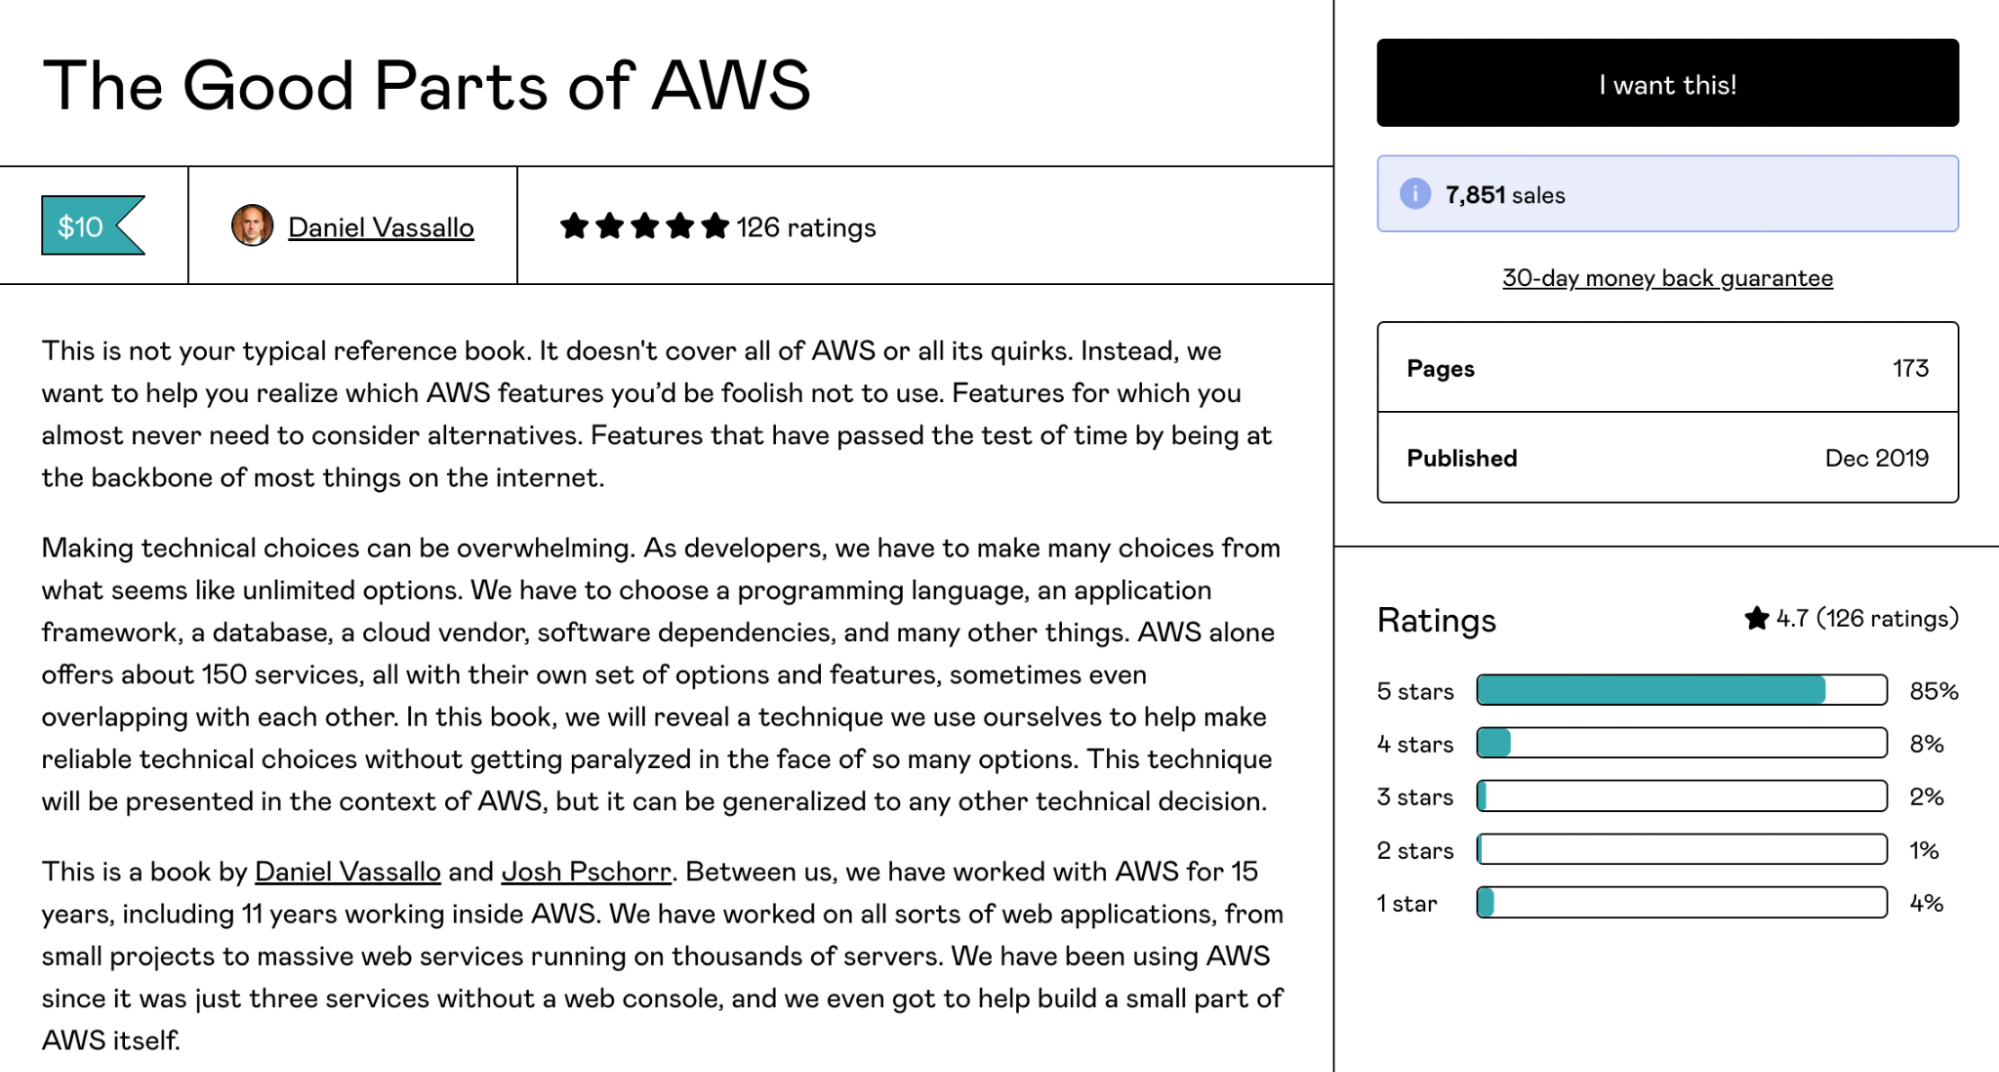 The landing page for Daniel Vassallo’s book, The Good Parts of AWS.